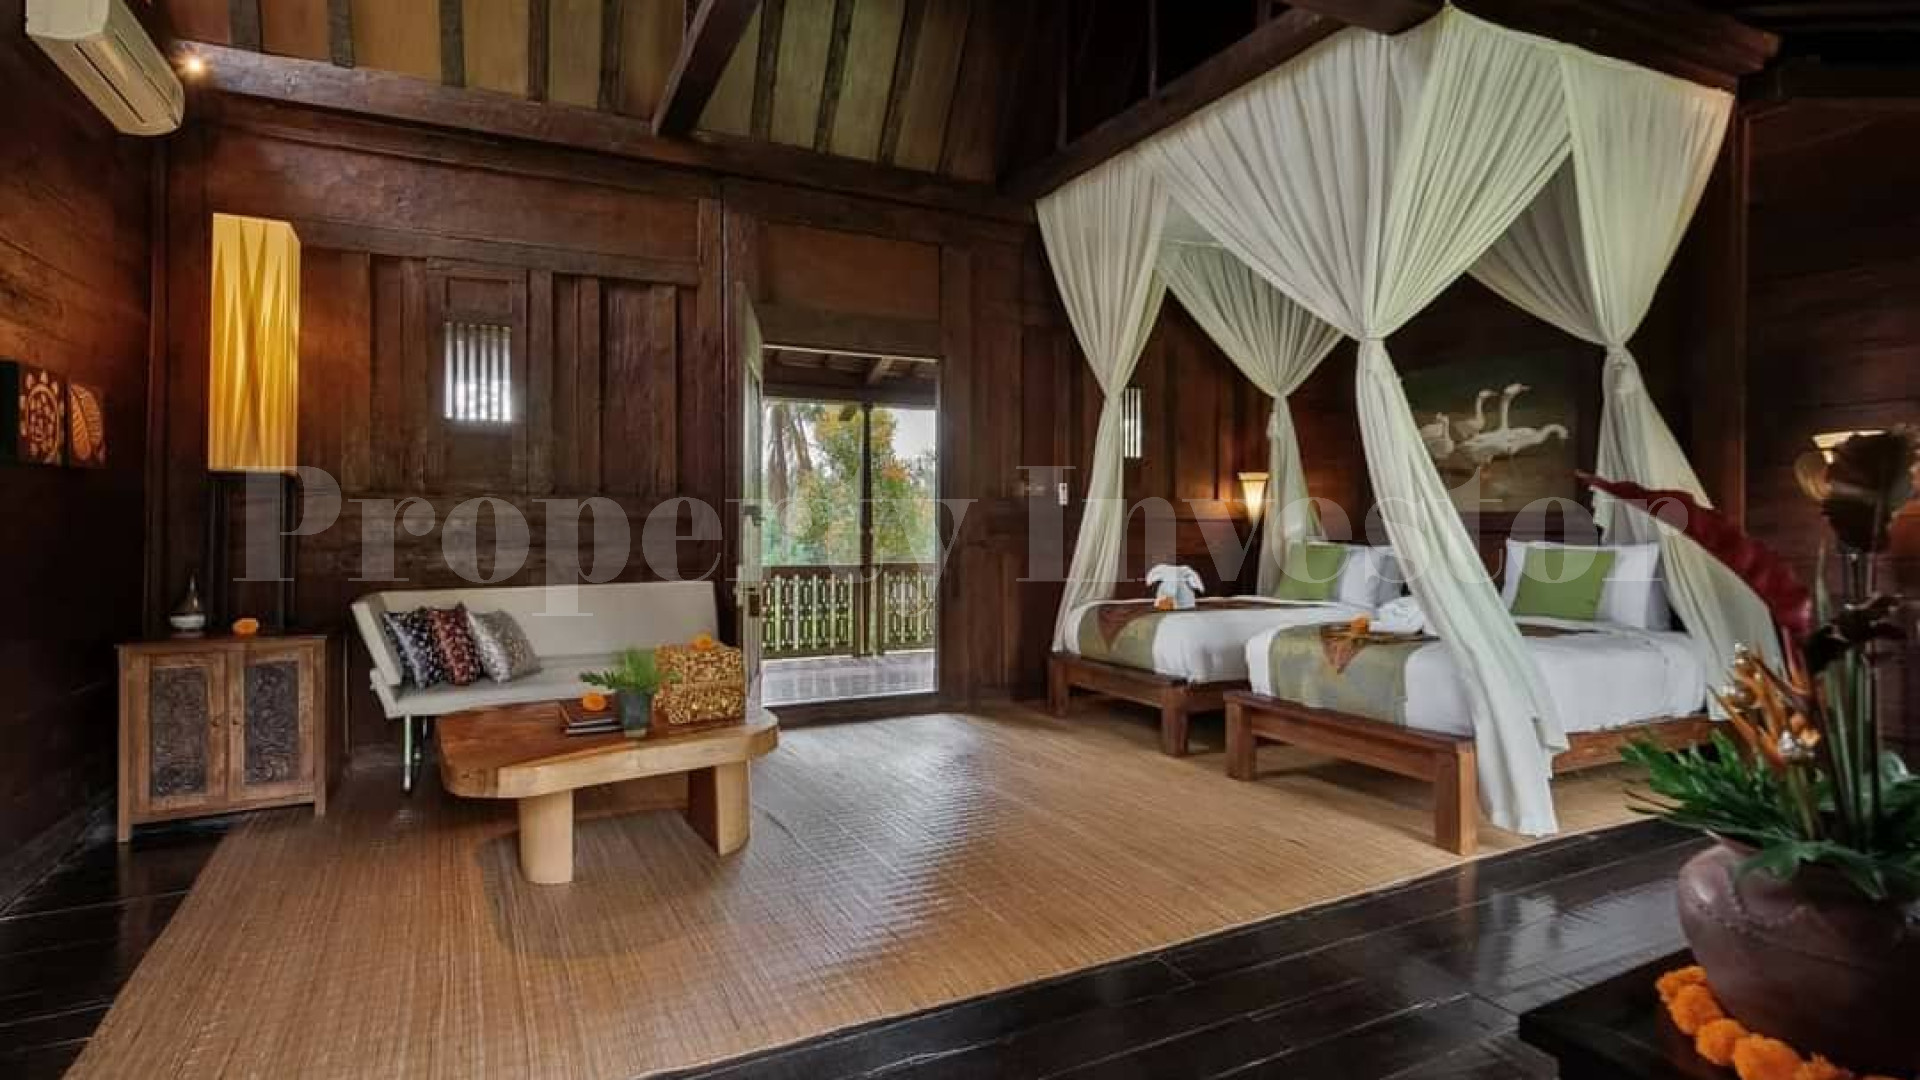 Lush 4 Bedroom Balinese Estate with Jungle & Valley Views for Sale in North-Ubud, Bali